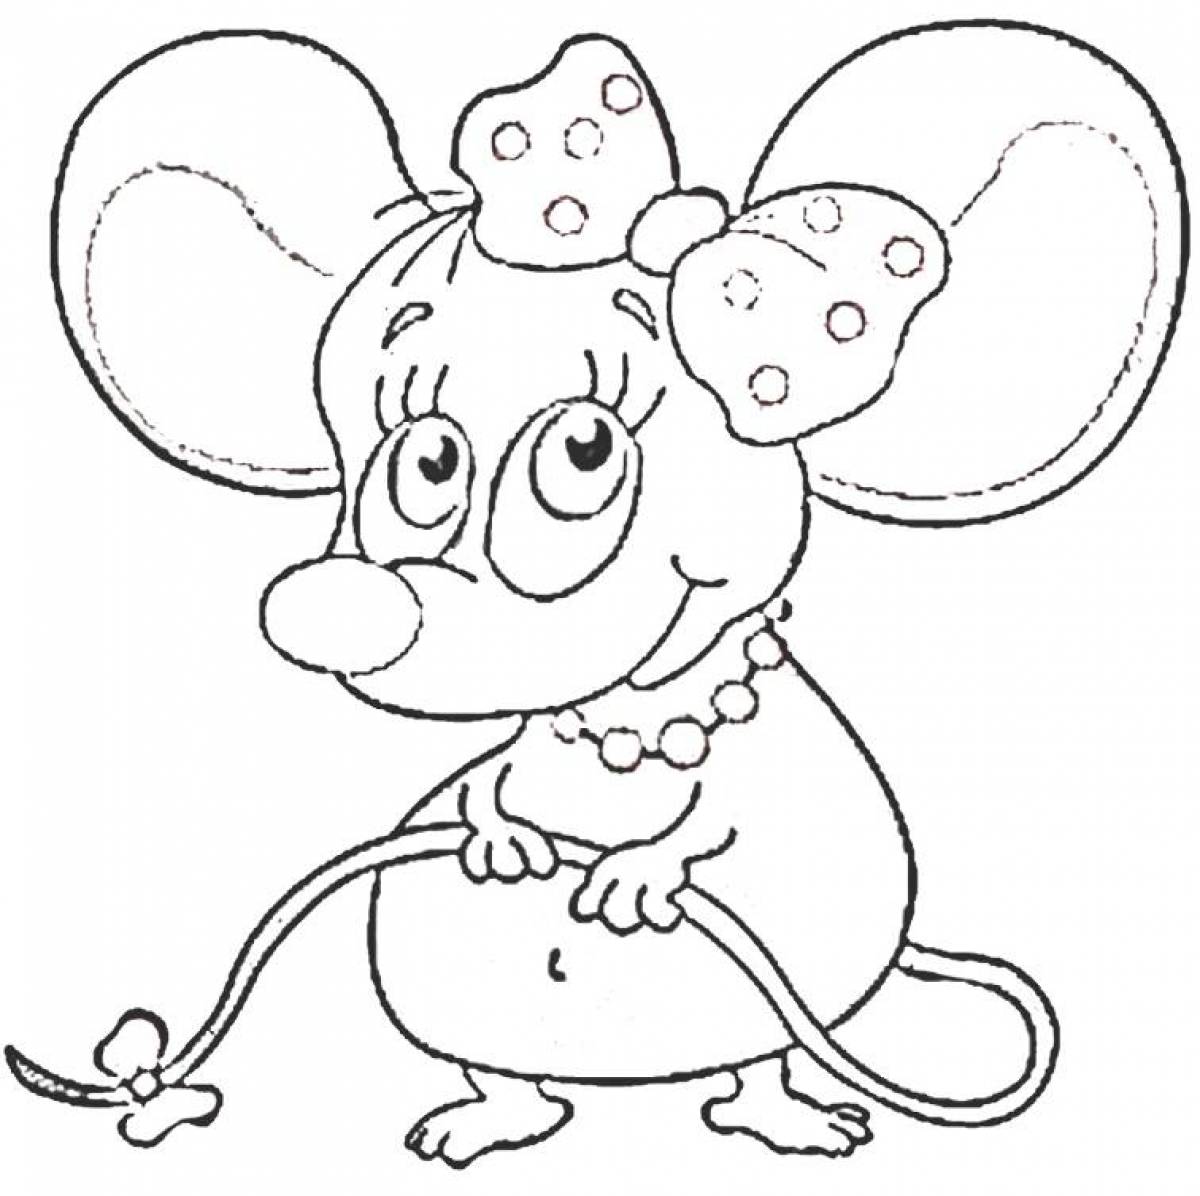 Inspirational little mouse coloring page